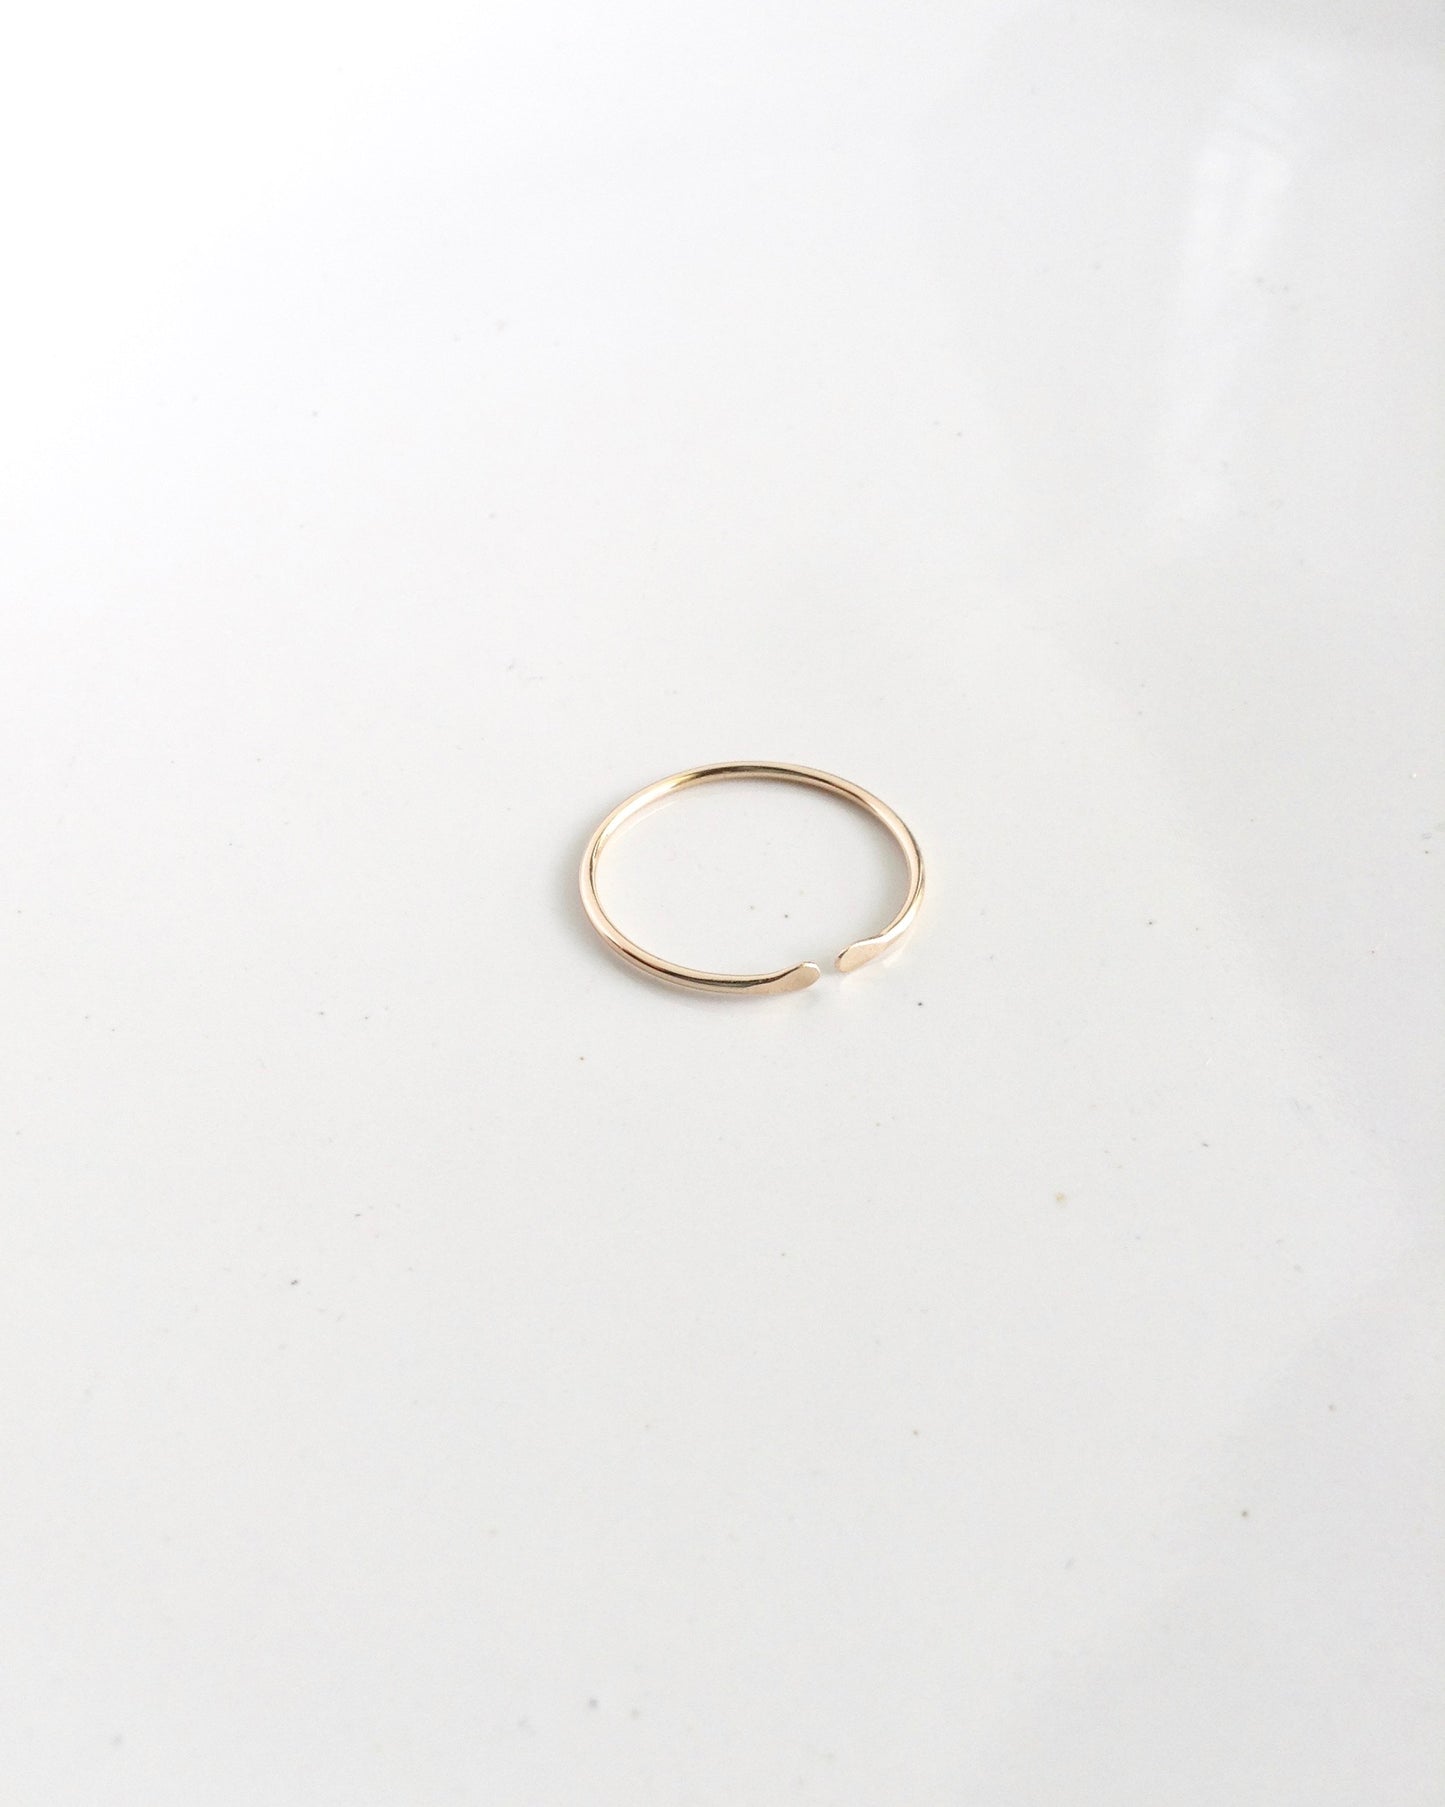 Dainty Stacking Ring in Gold Filled Sterling Silver or Rose Gold Filled | IB Jewelry